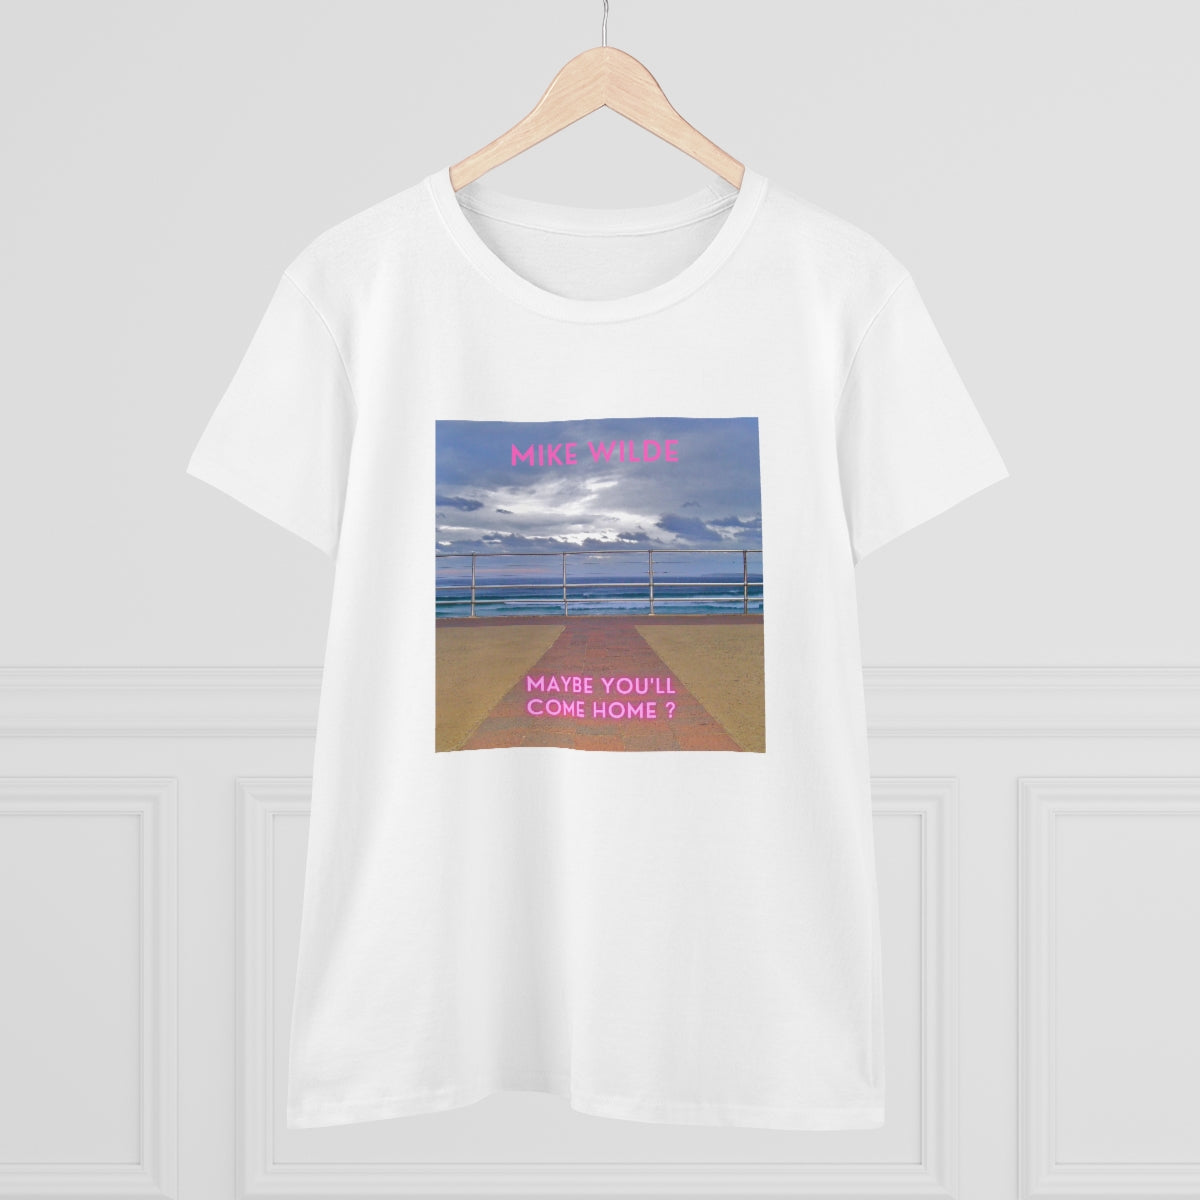 'Maybe You'll Come Home' Women's Midweight Cotton Tee